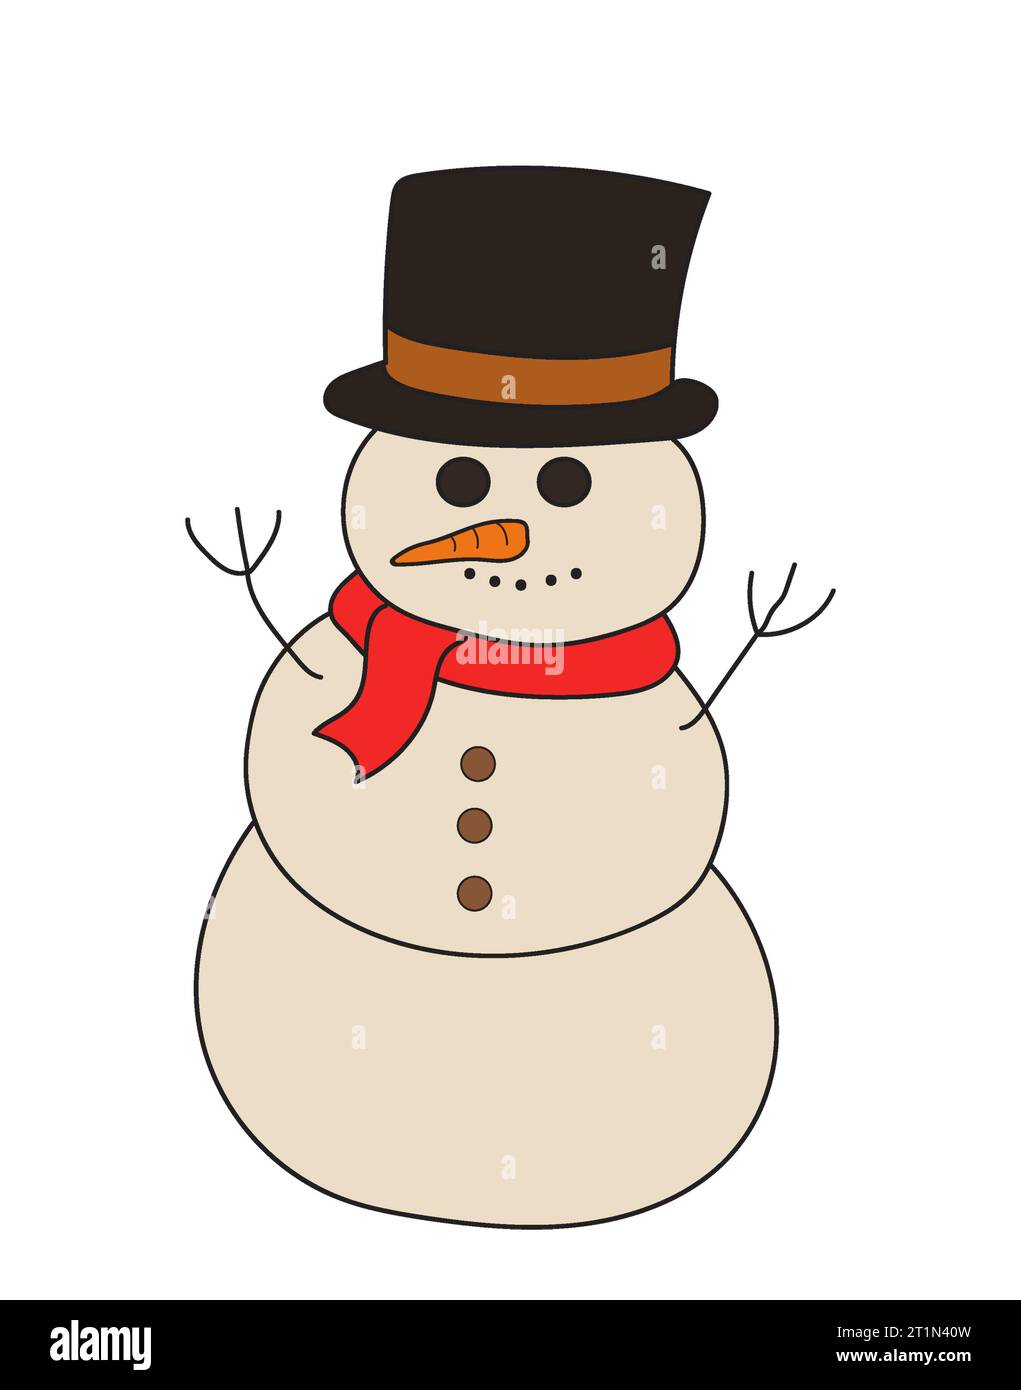 Cute cartoon drawing of snowman. Christmas celebration. Clipart illustration isolated on white background. Stock Photo